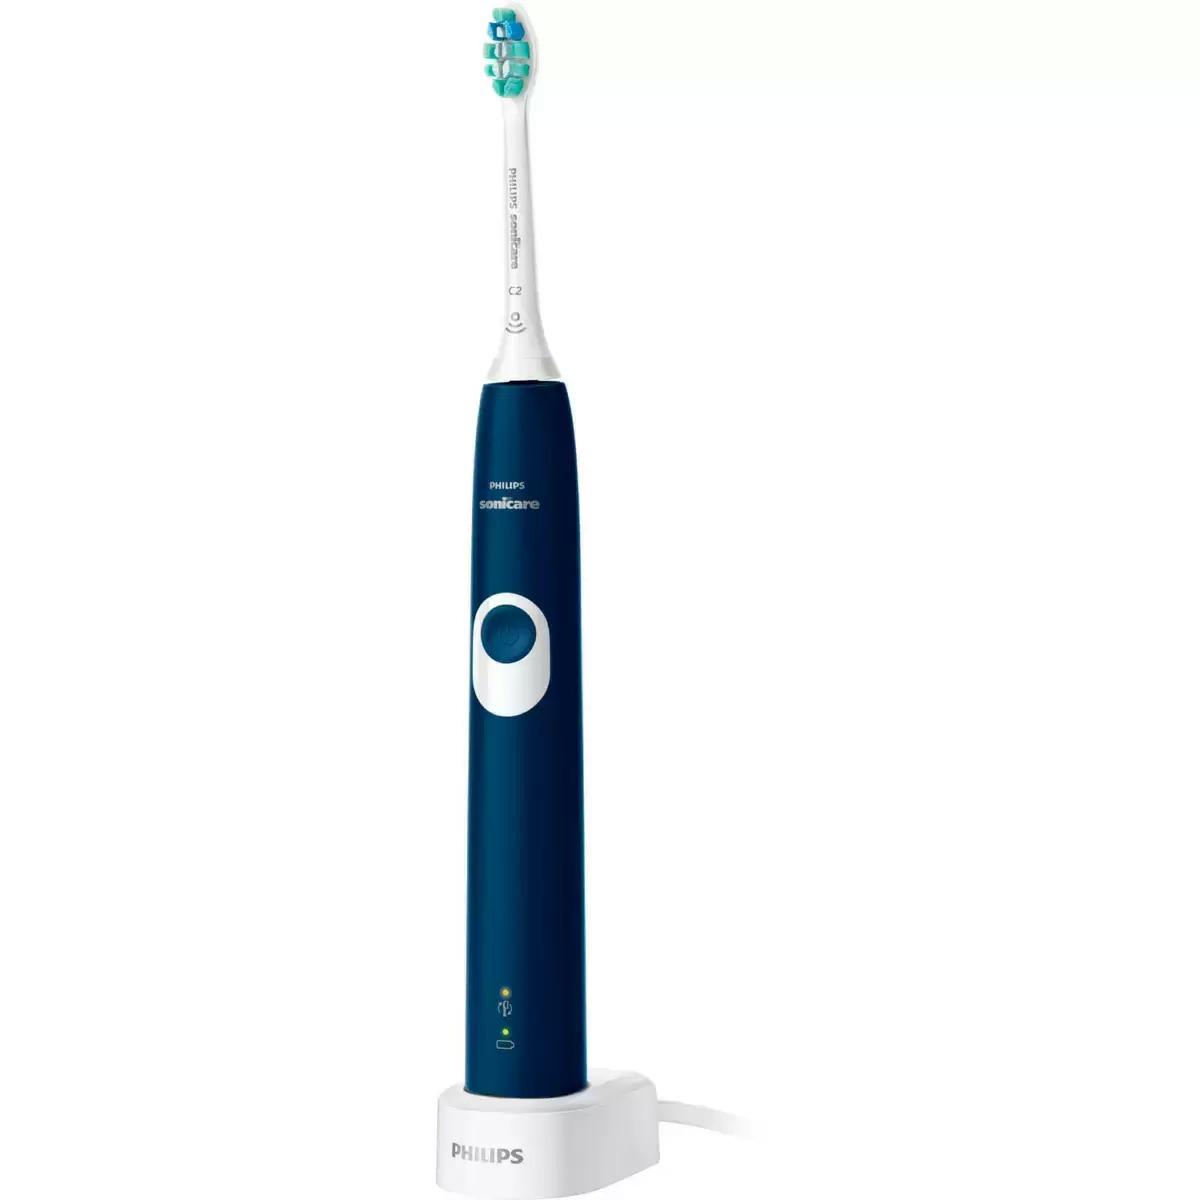 Philips Sonicare ProtectiveClean 4100 HX6811 Electric Toothbrush for $29.99 Shipped